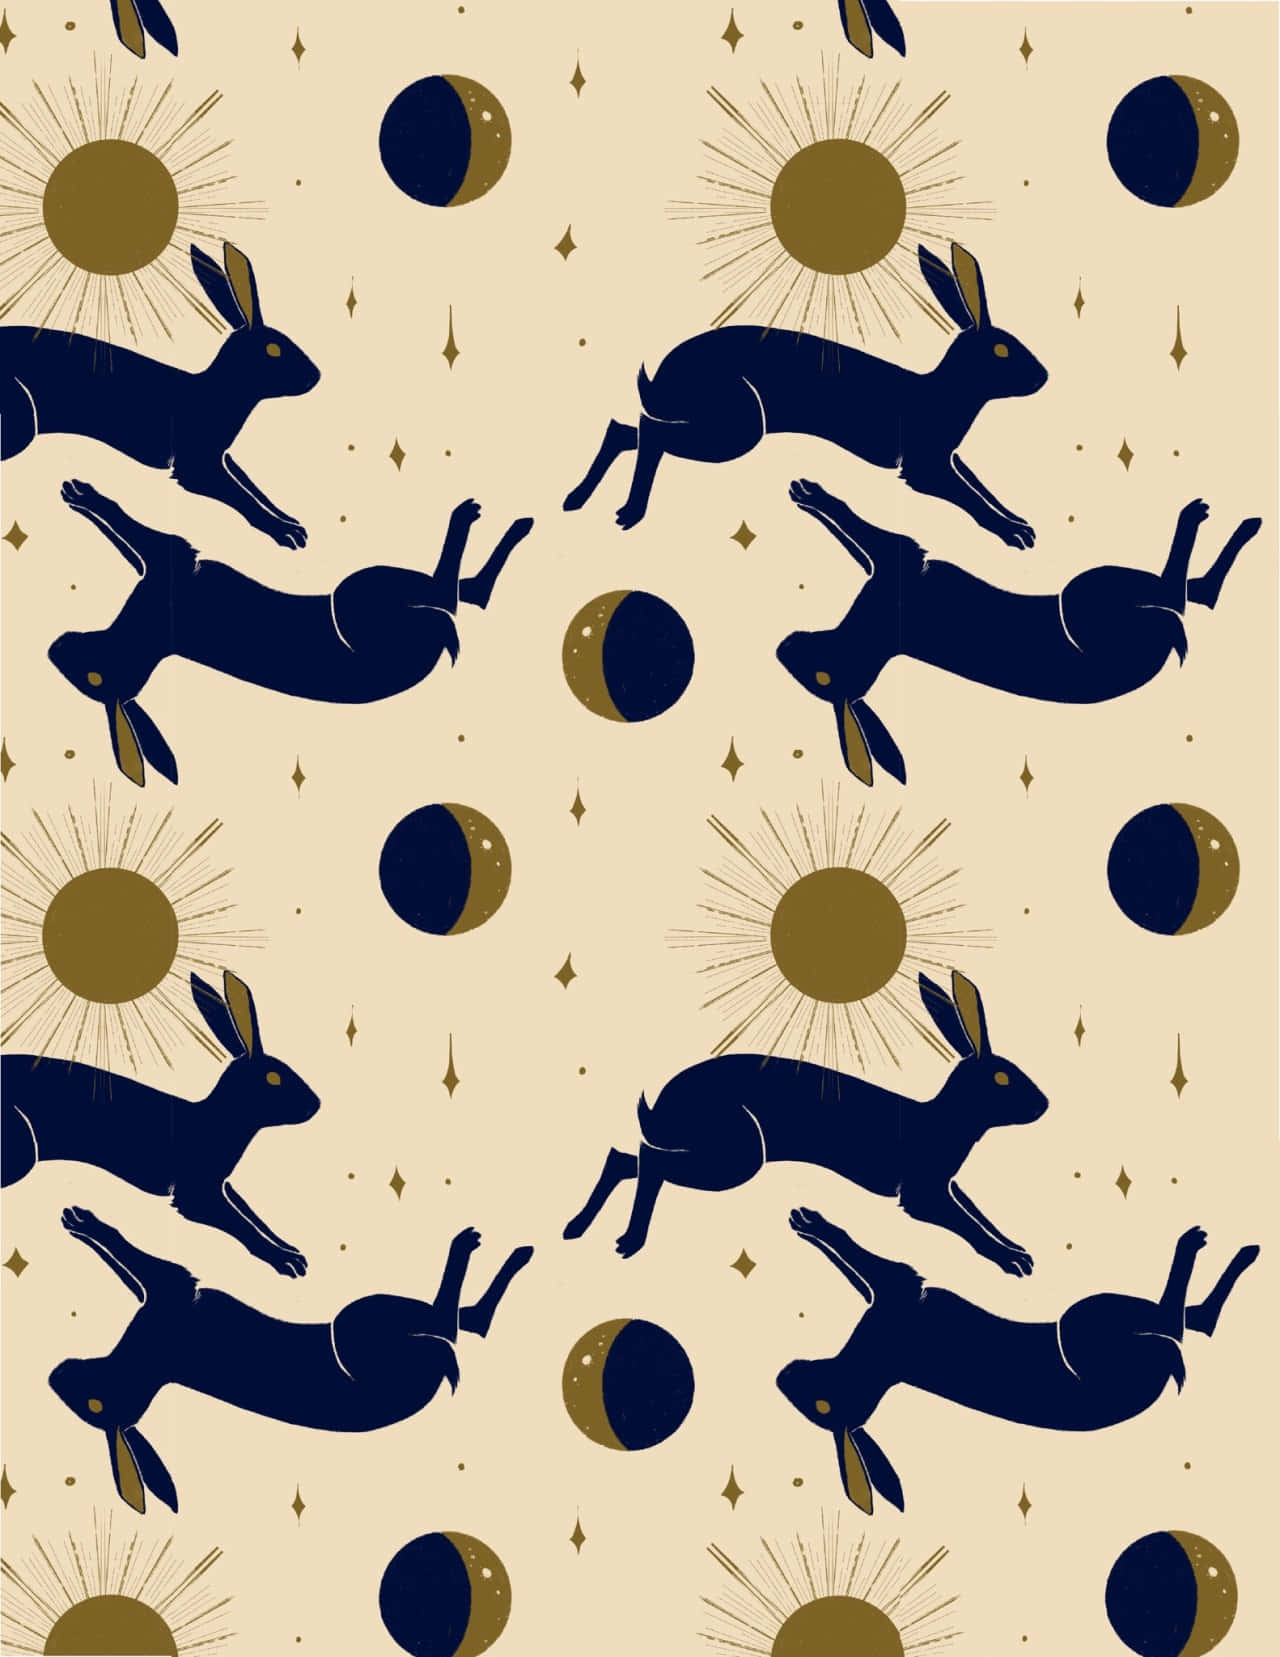 A fashionable traditional navy and white patterned wallpaper perfect to add style to any room. Wallpaper